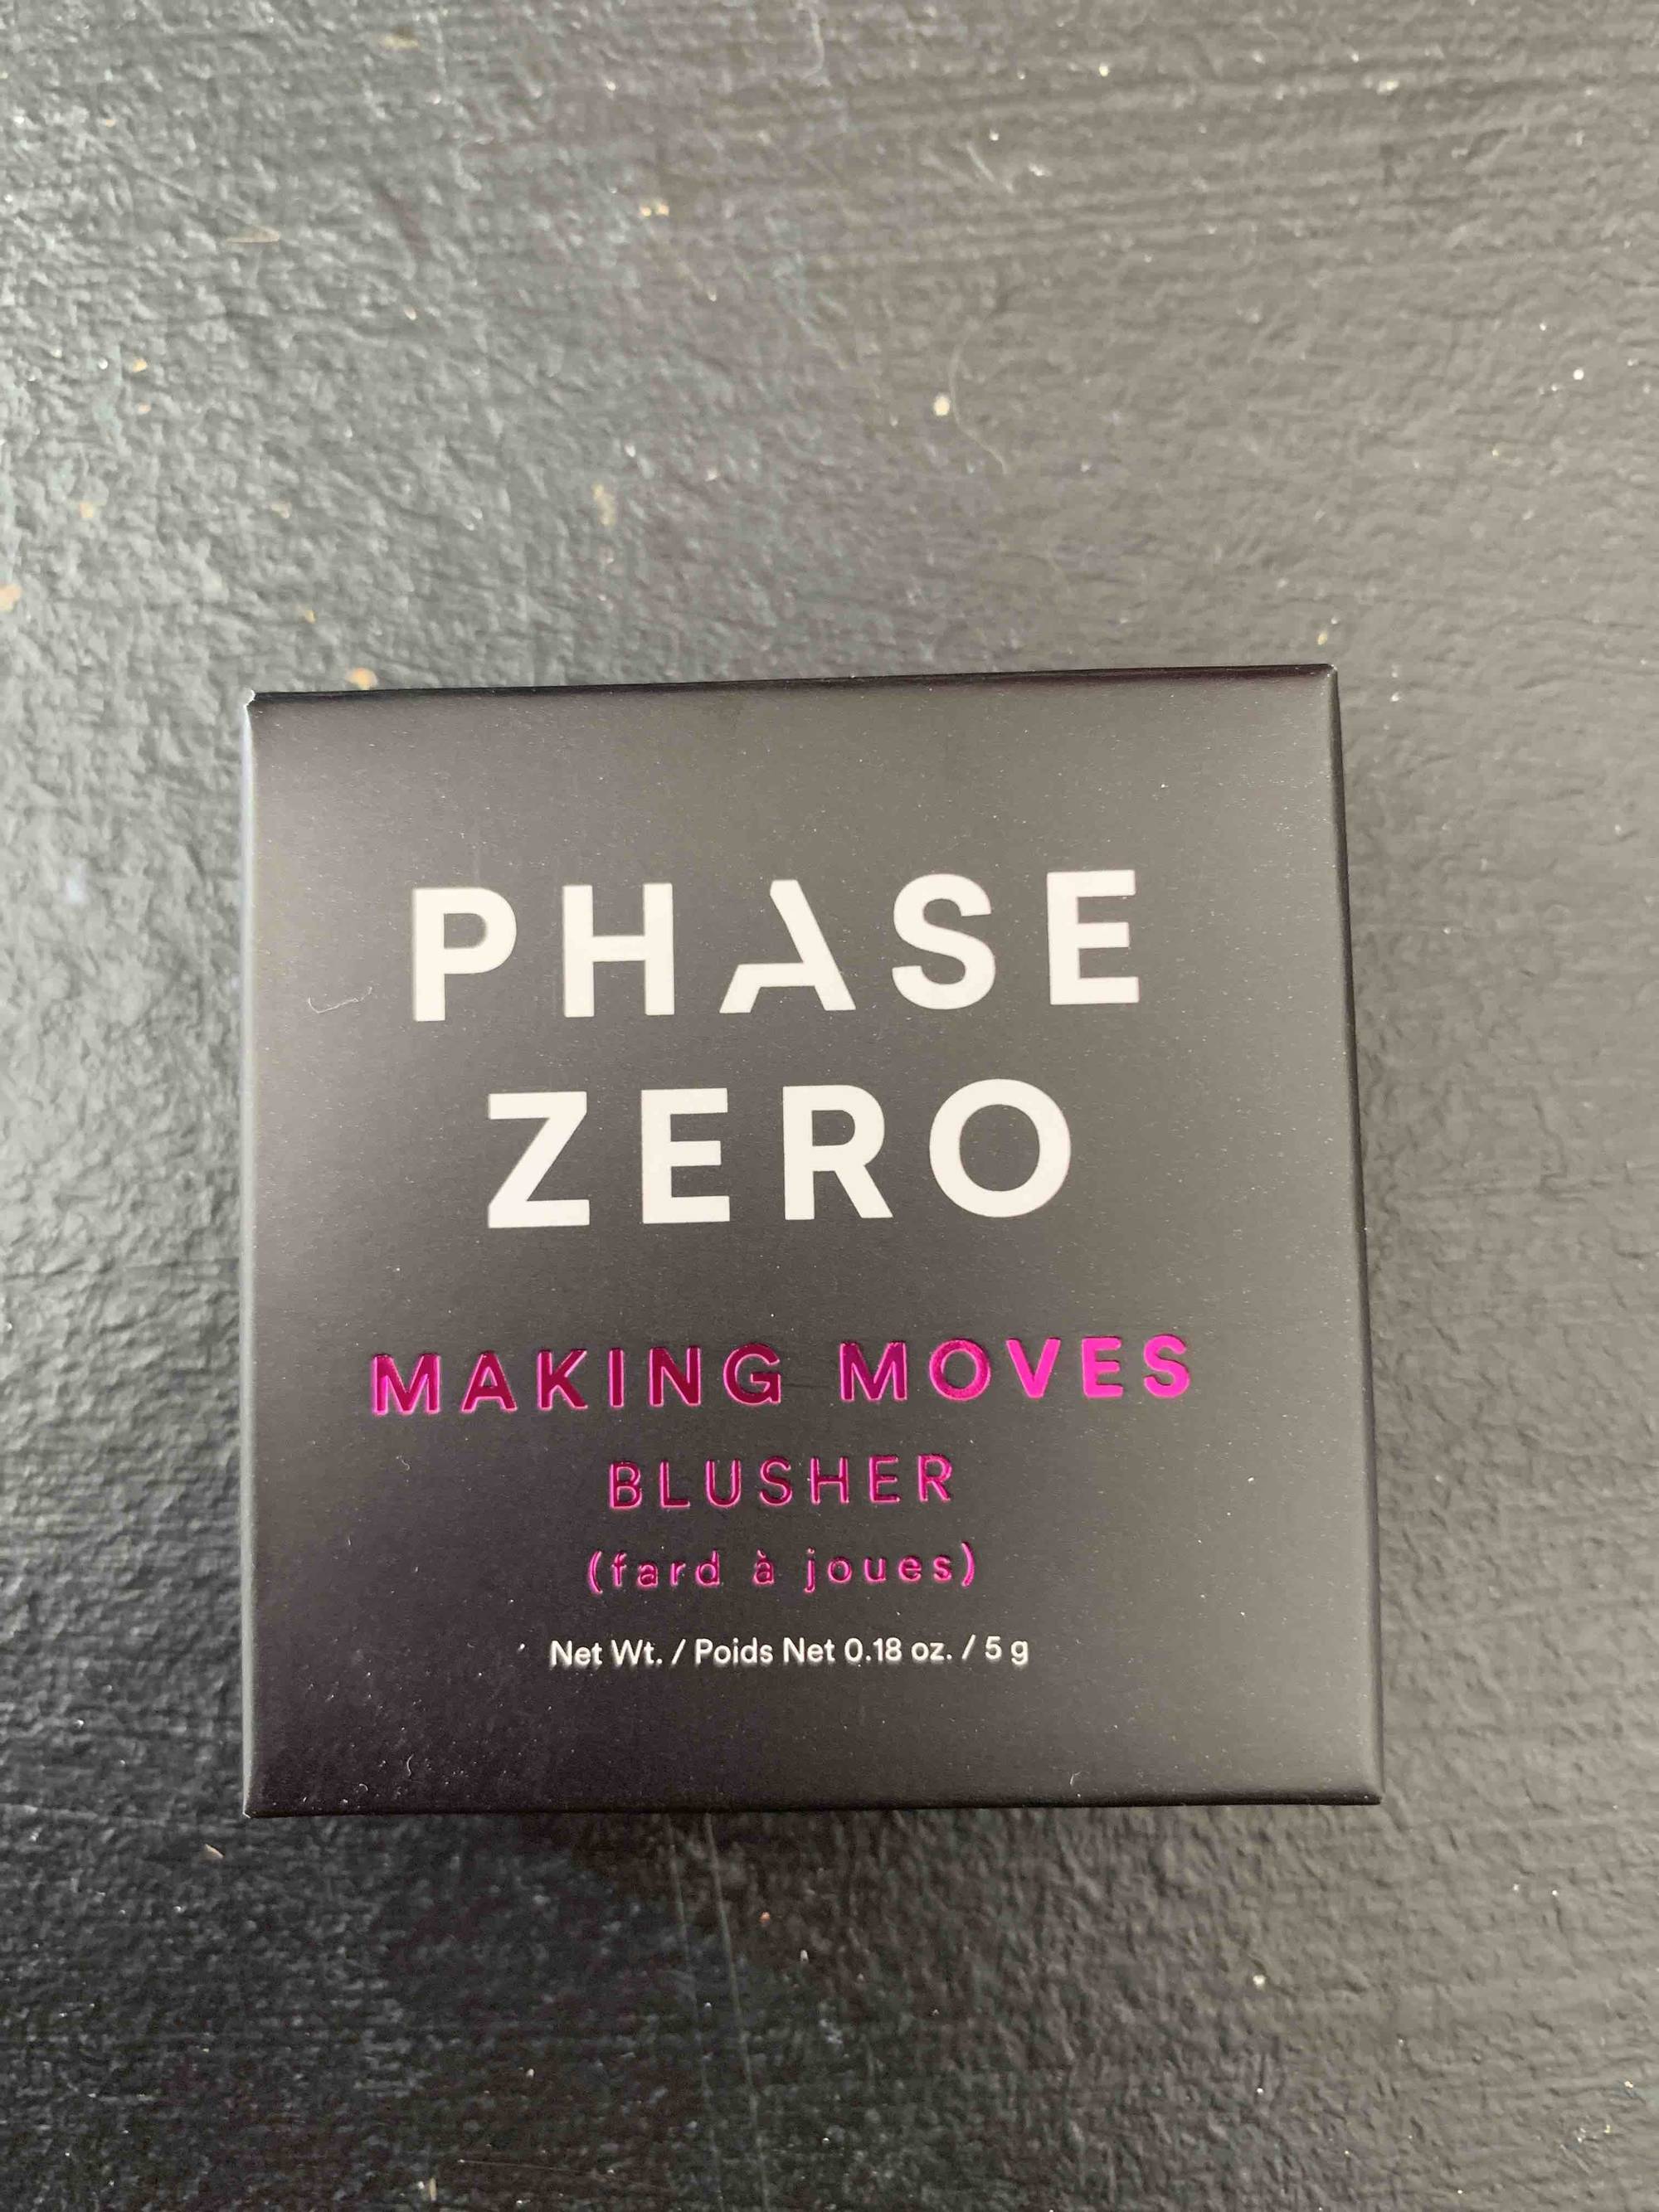 PHASE ZERO - Making moves - Fard à joues